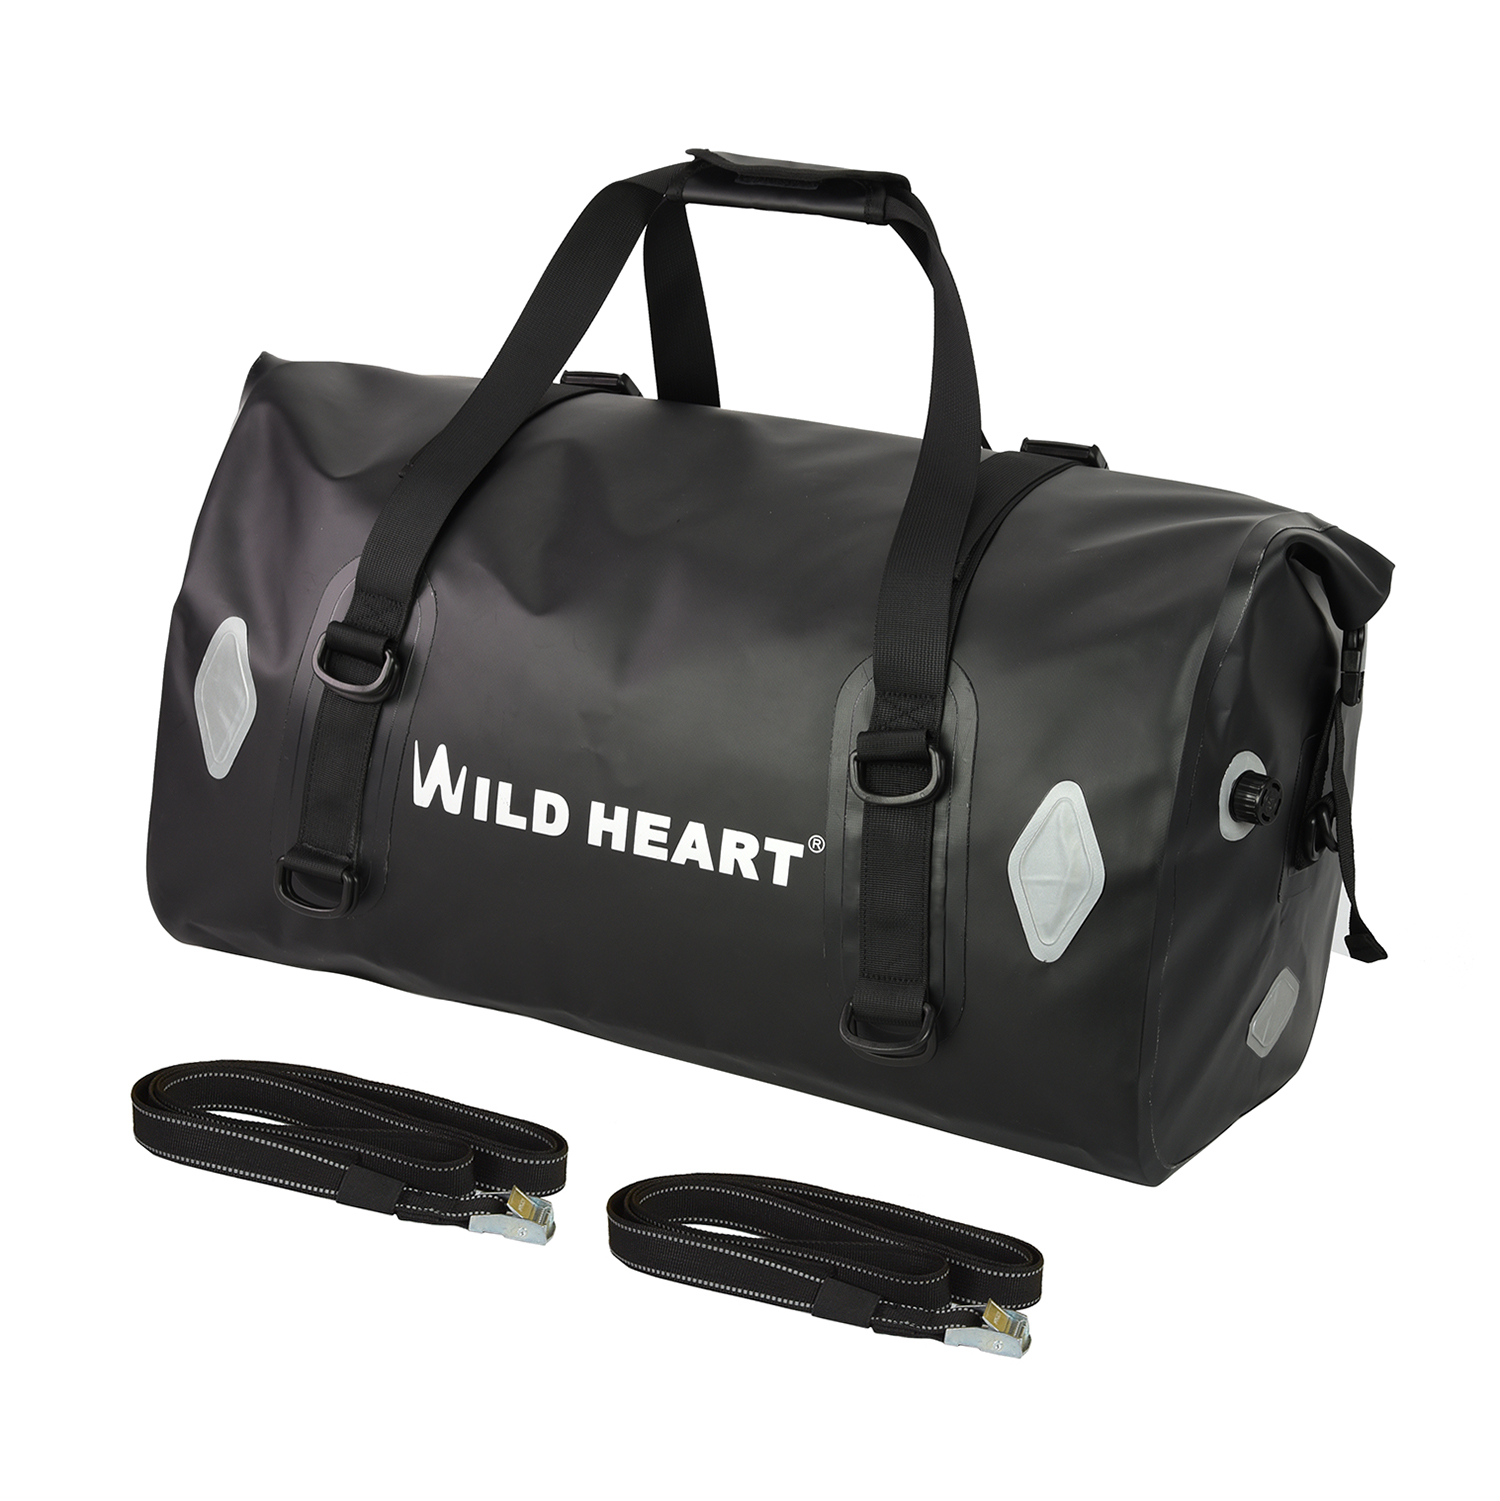  WILD HEART Waterproof Bag 55L 66L 77L Motorcycle Dry Duffel Bag  for Travel,Motorcycling, Cycling,Hiking,Camping (55L, Black) : Automotive